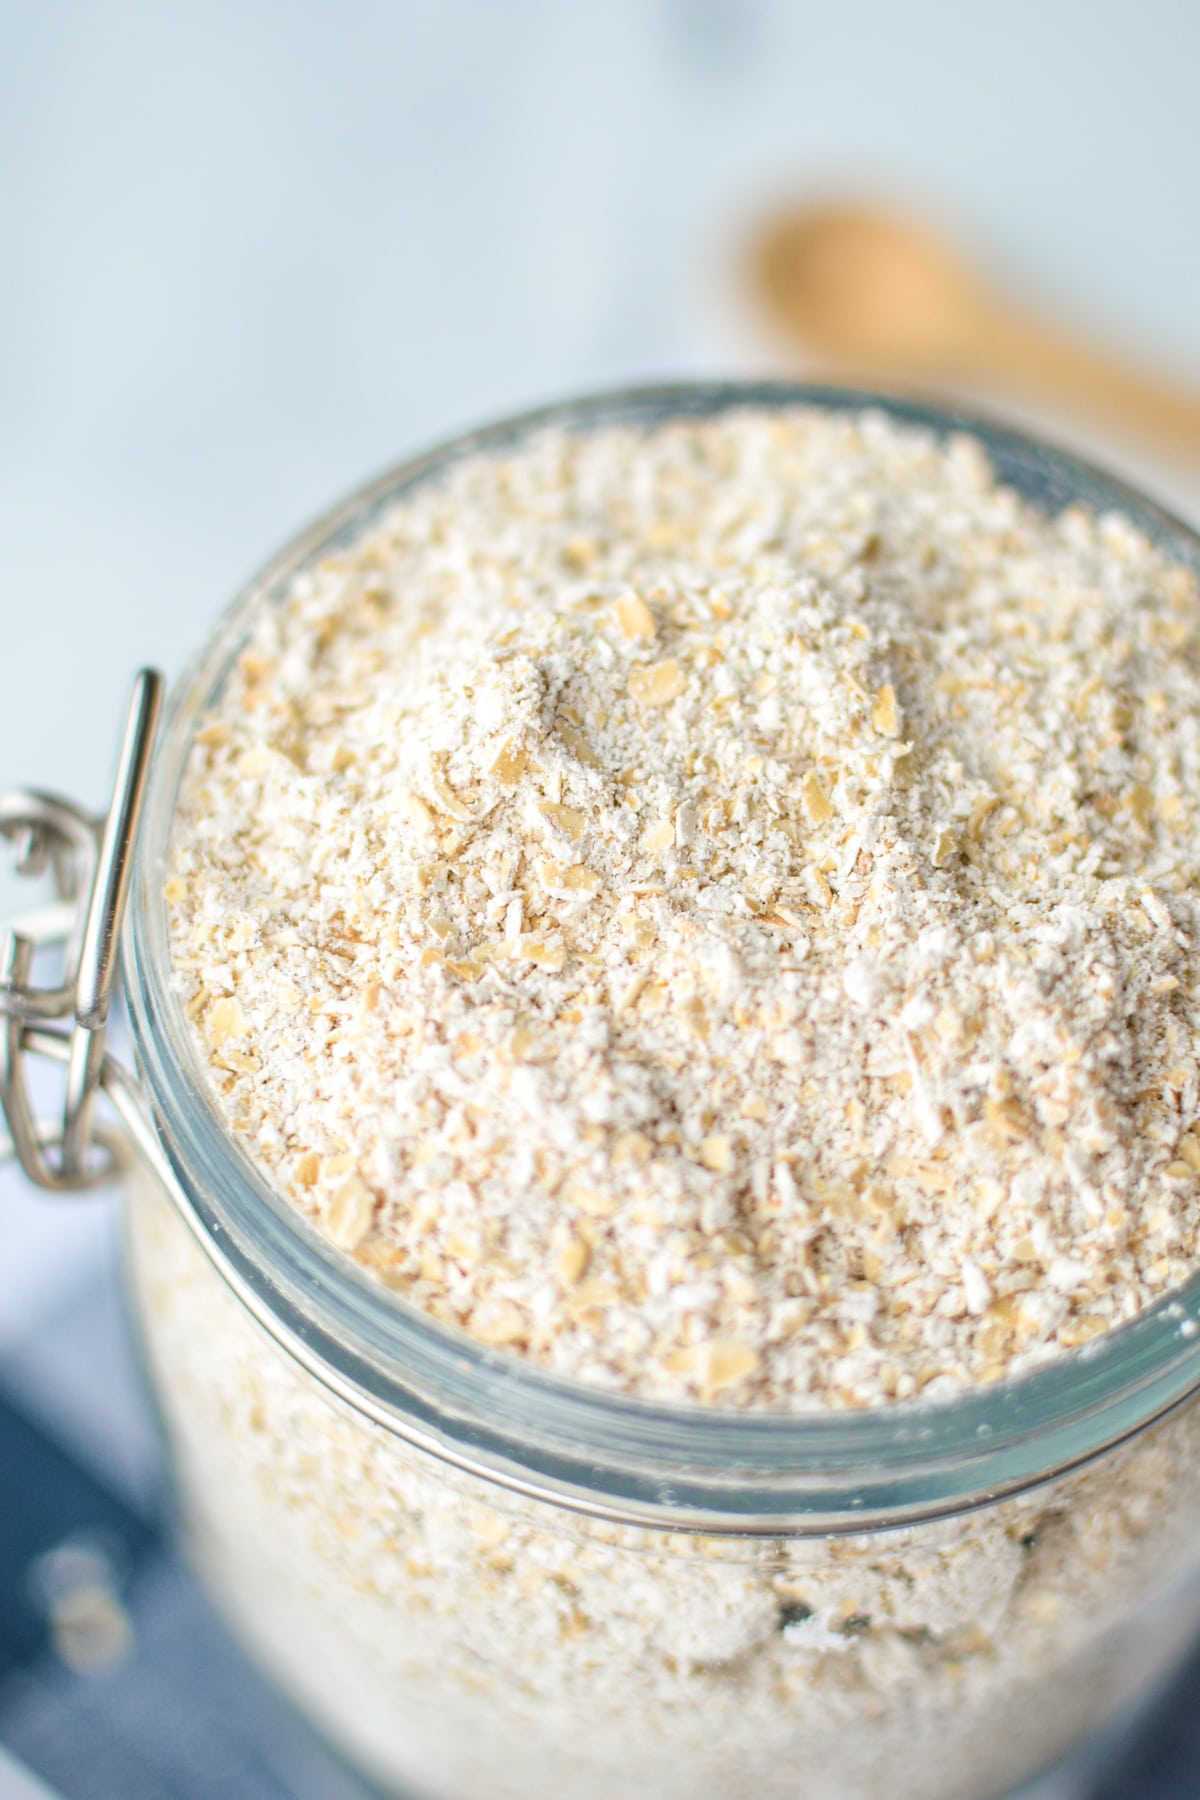 A close up of a container of homemade oat flour.